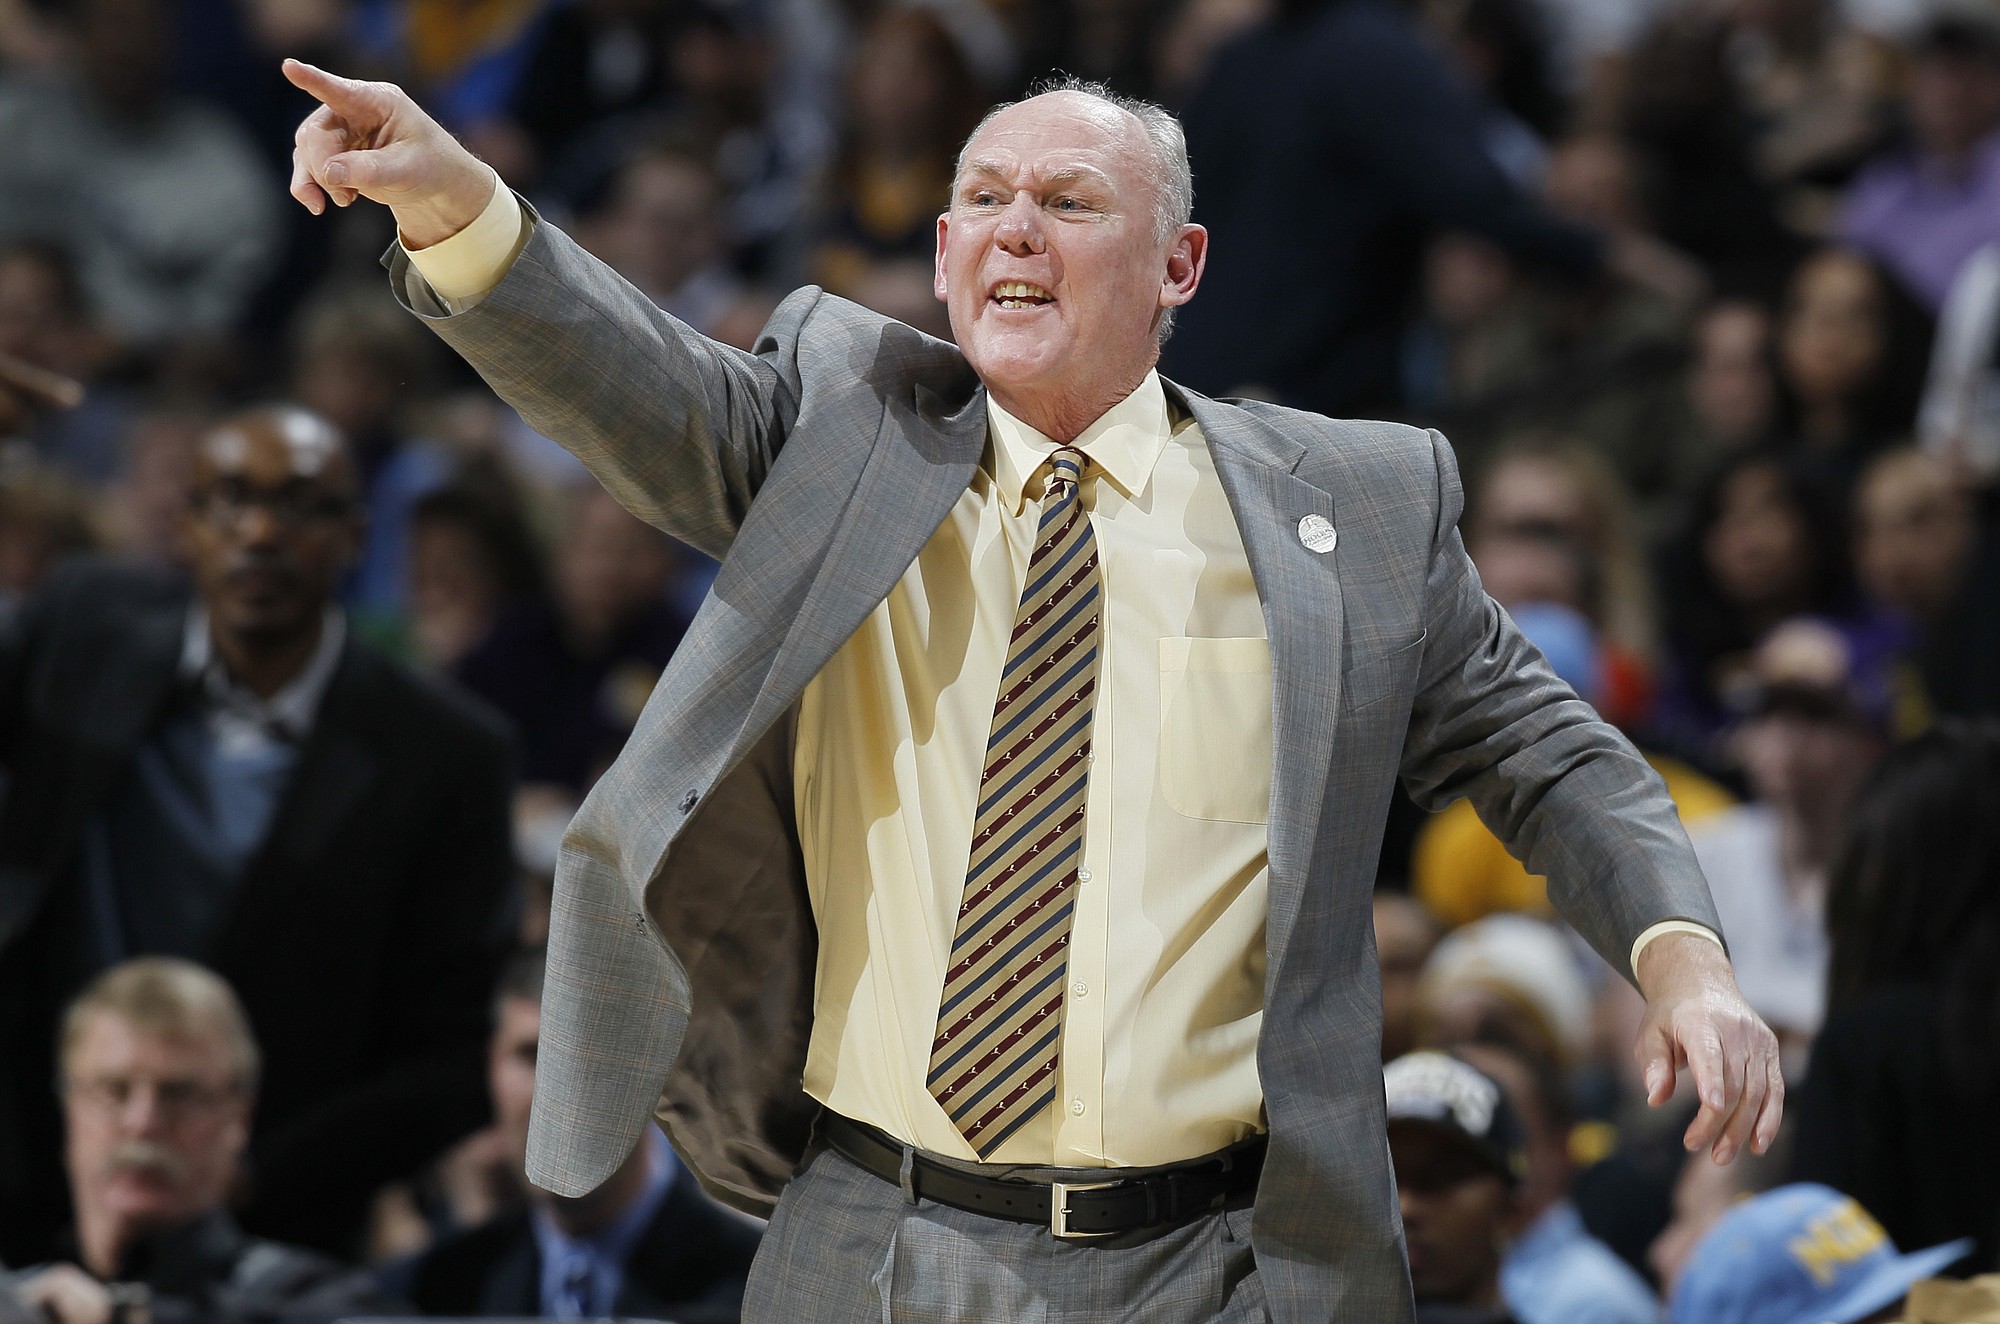 The Sacramento Kings announced Thursday that they had reached an agreement in principle with George Karl to become the head coach. The team said a news conference to introduce Karl would be scheduled when the agreement is finalized.